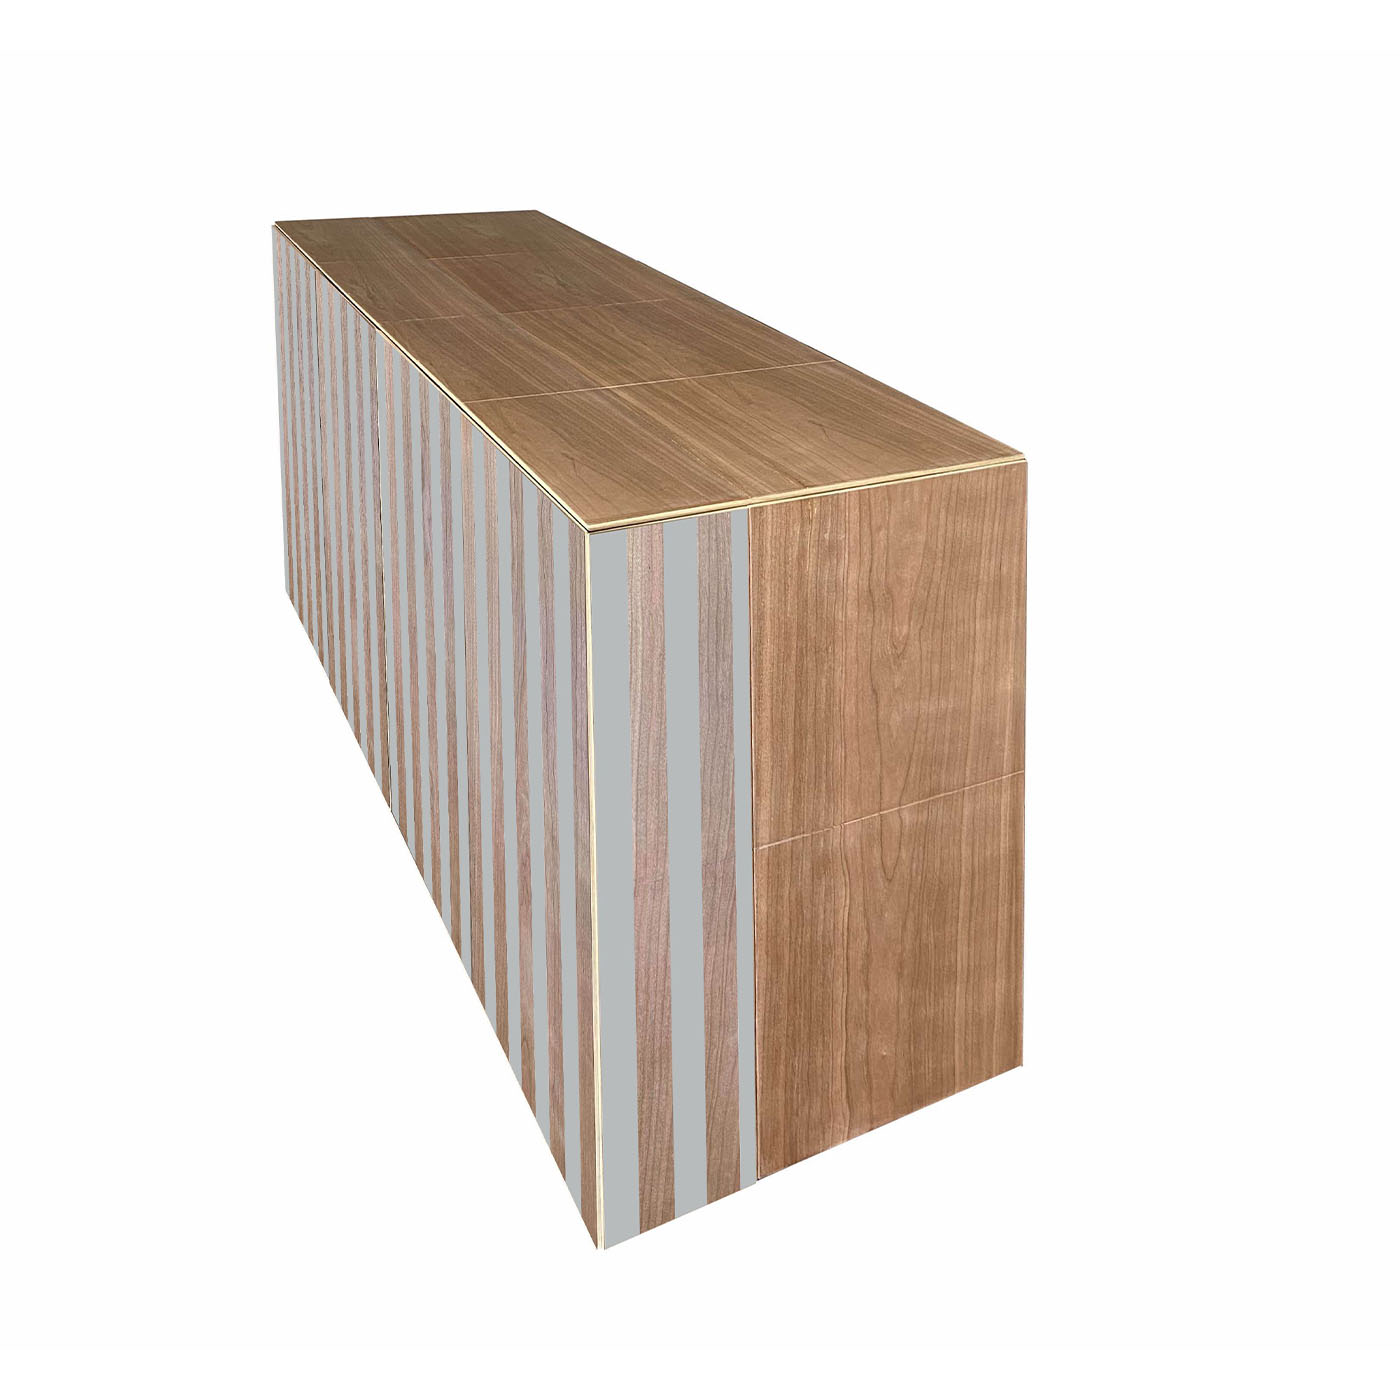 Md2 4-Door Striped Sideboard by Meccani Studio - Alternative view 2